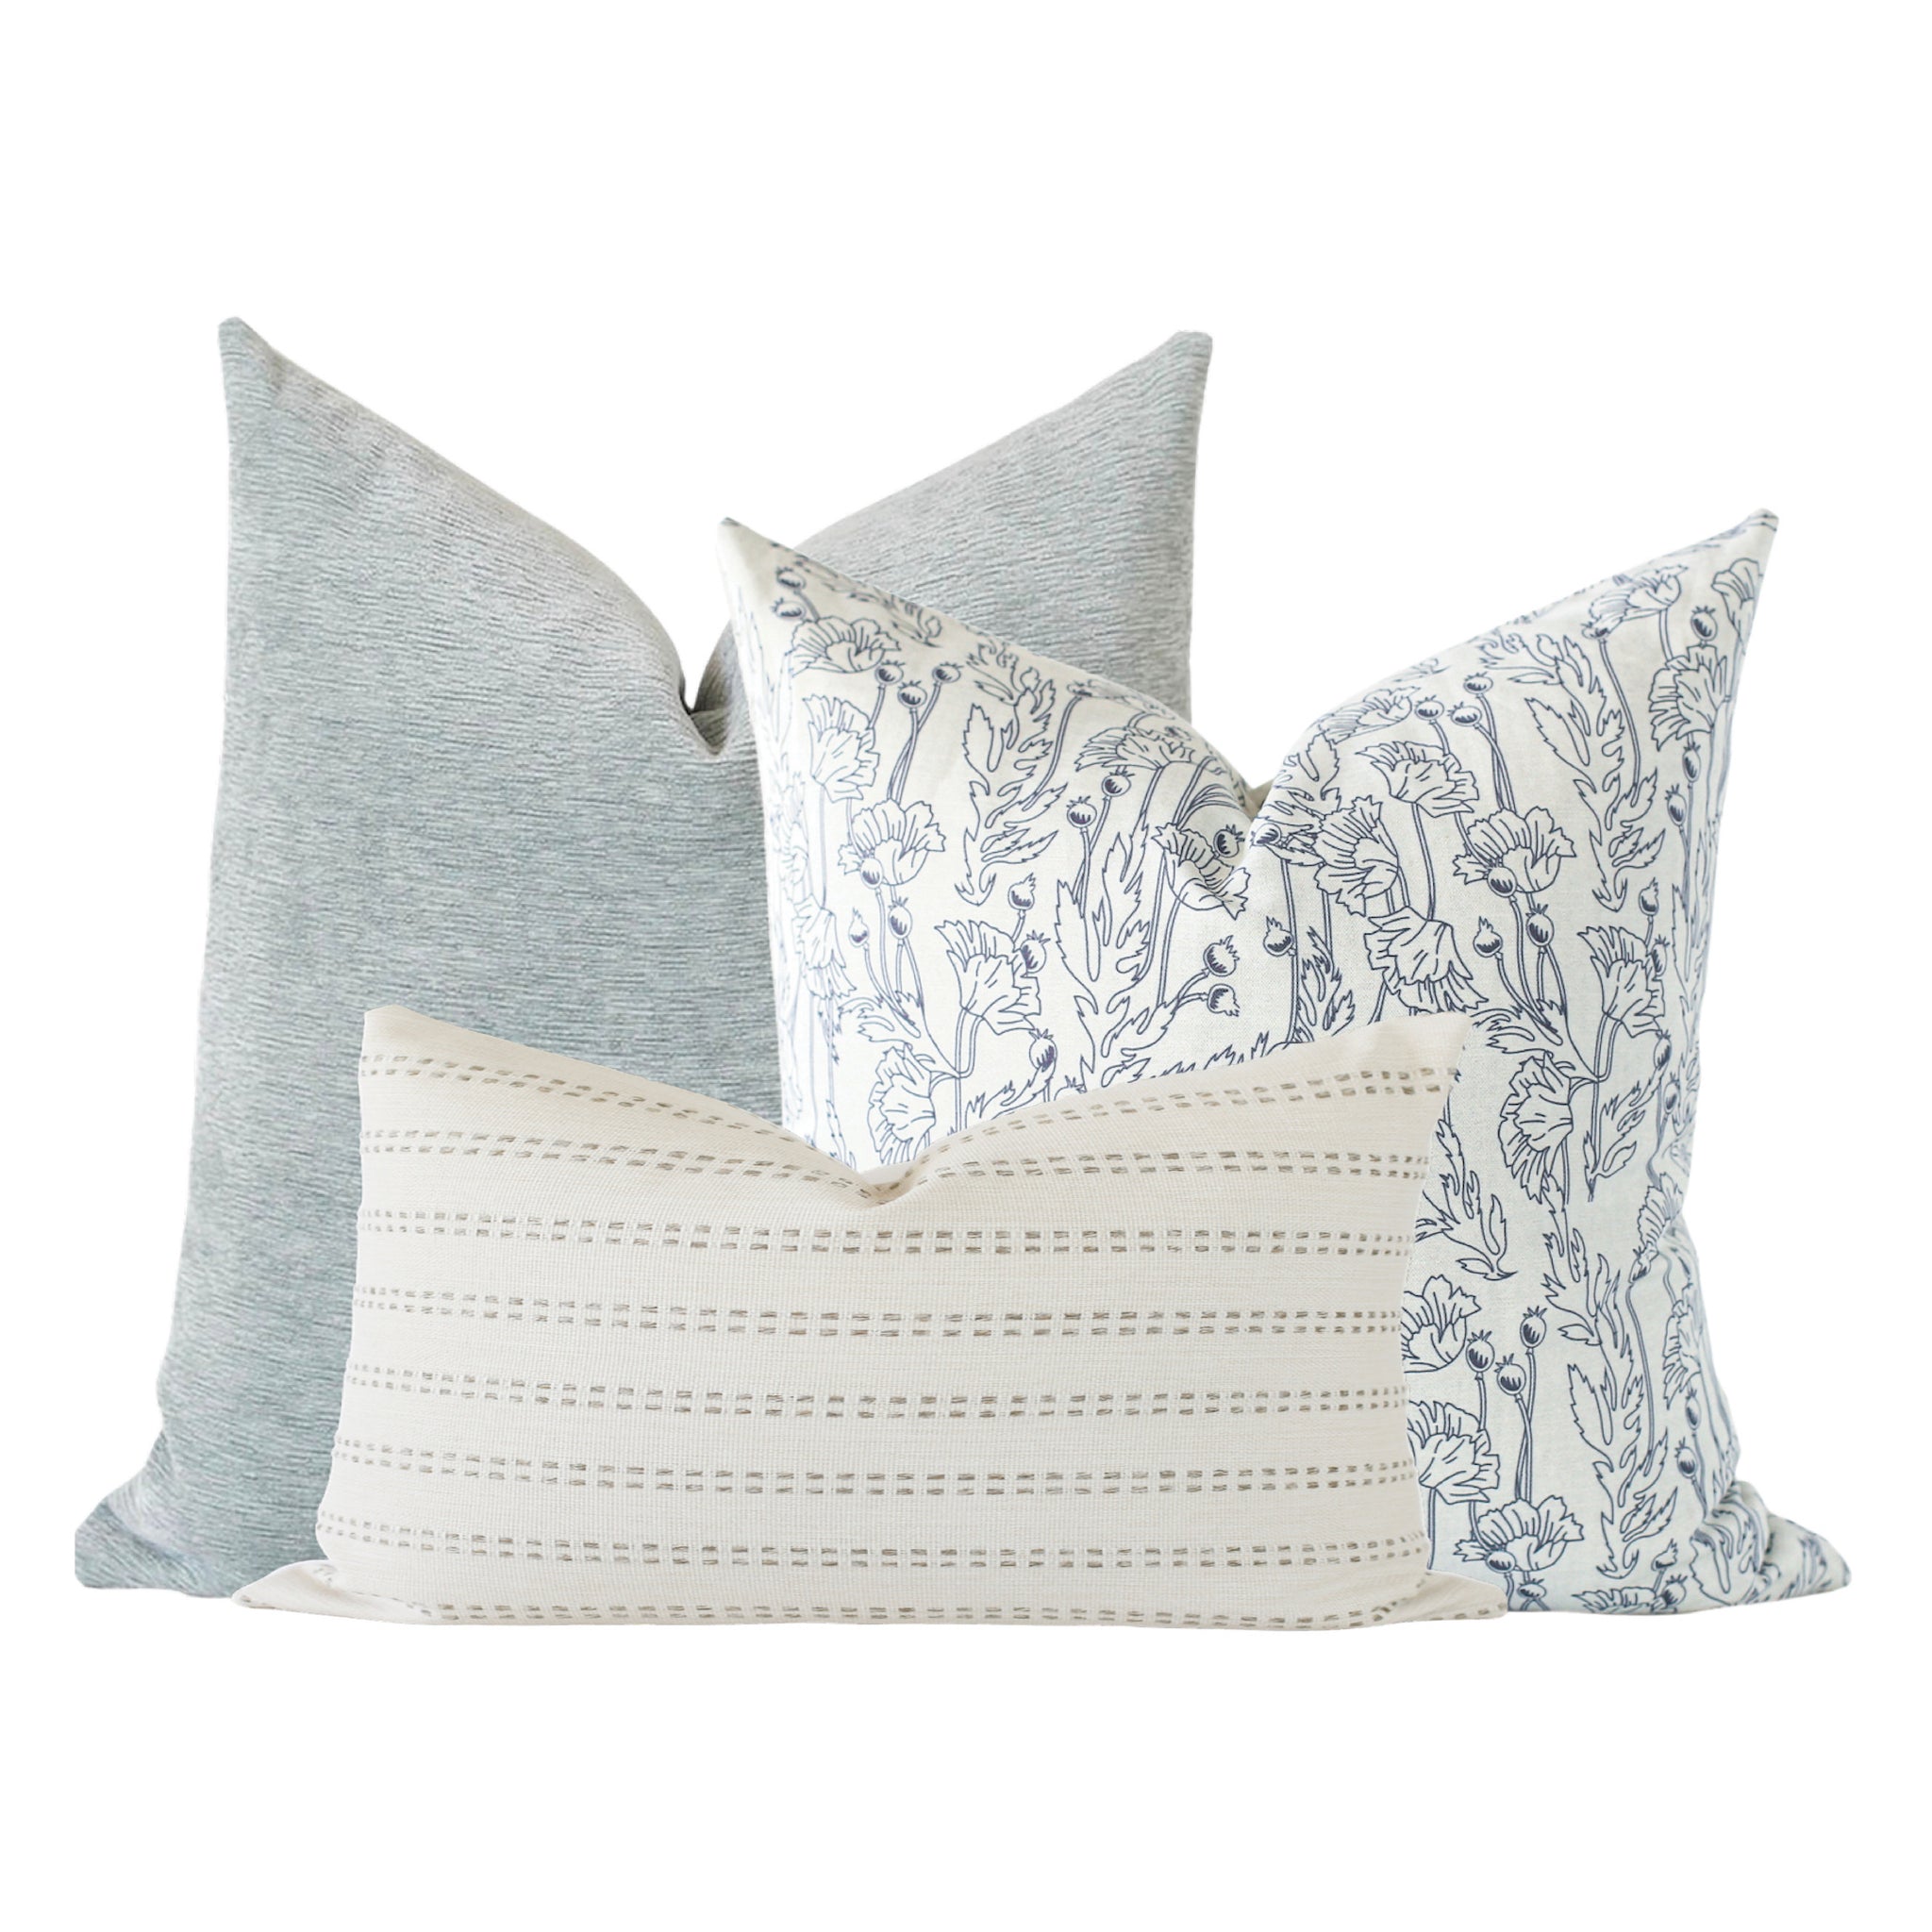 Affordable Blue & White Pillow Combos